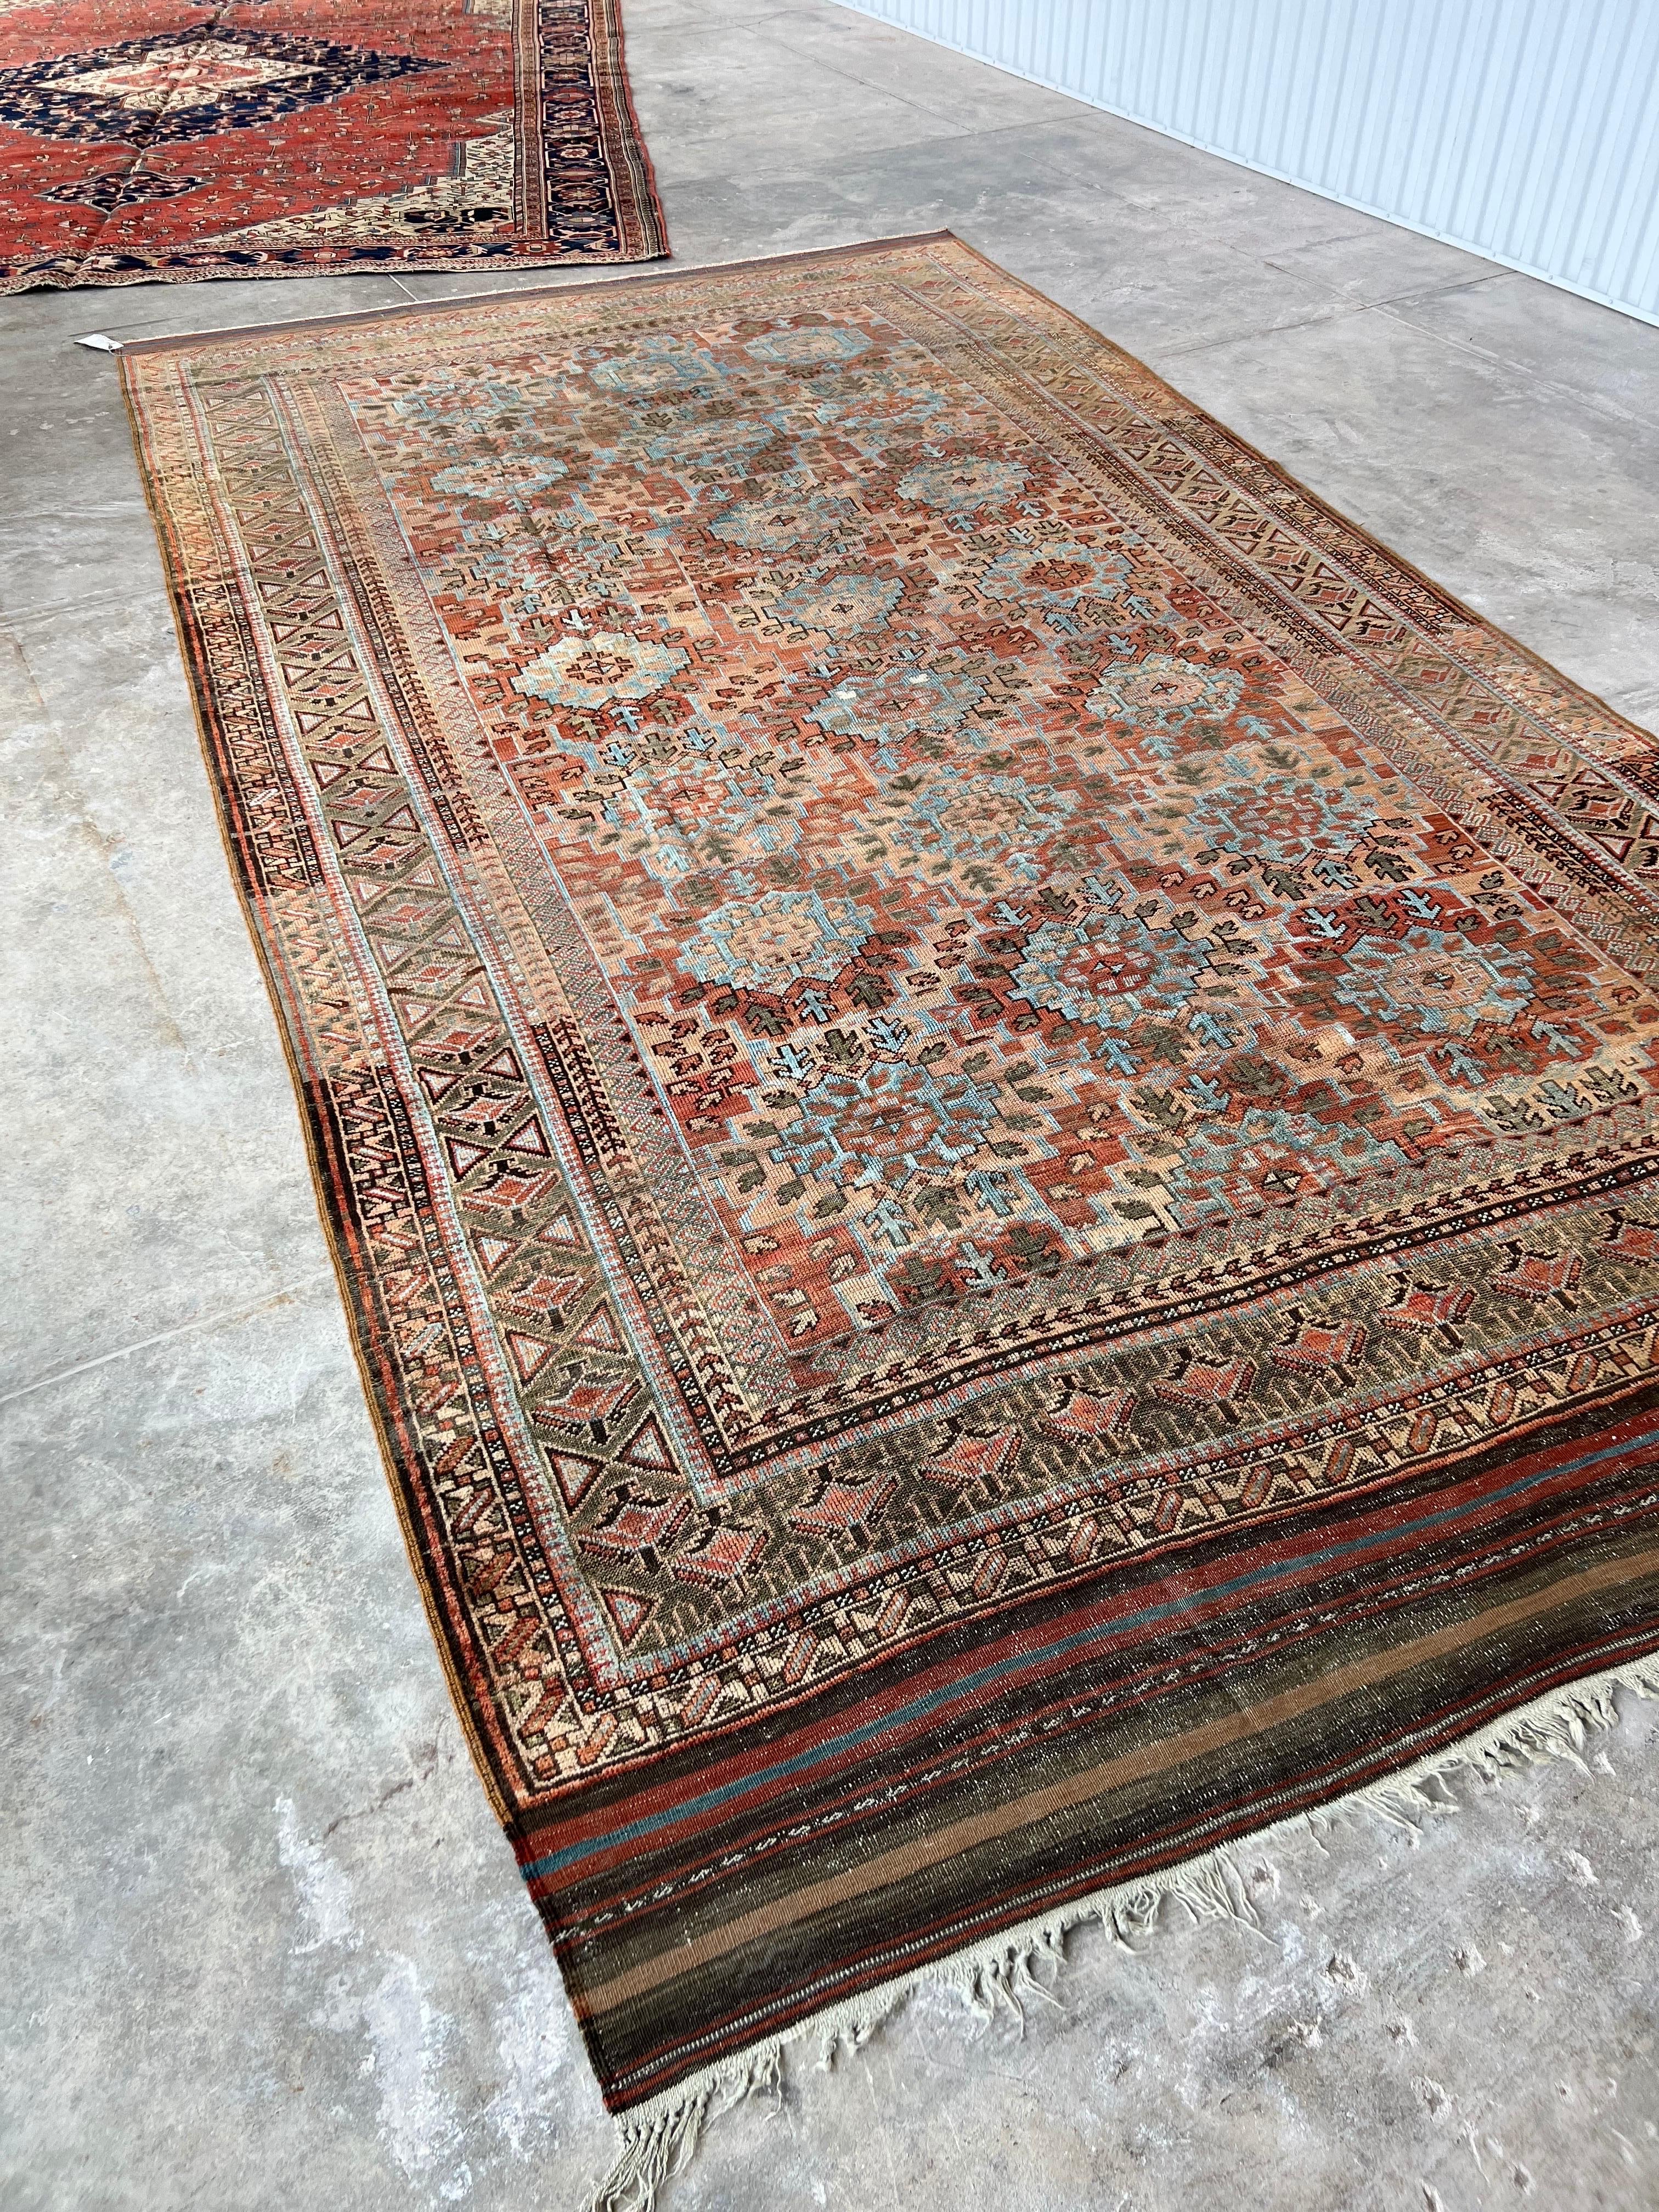 There are so many textures on this one rug! Baluch rugs were made by nomadic tribes. Each end is finished with a lovely flatweave and wild original fringe. This rug is soft and thin. Make sure to get a hefty felt and rubber rug pad to keep it in